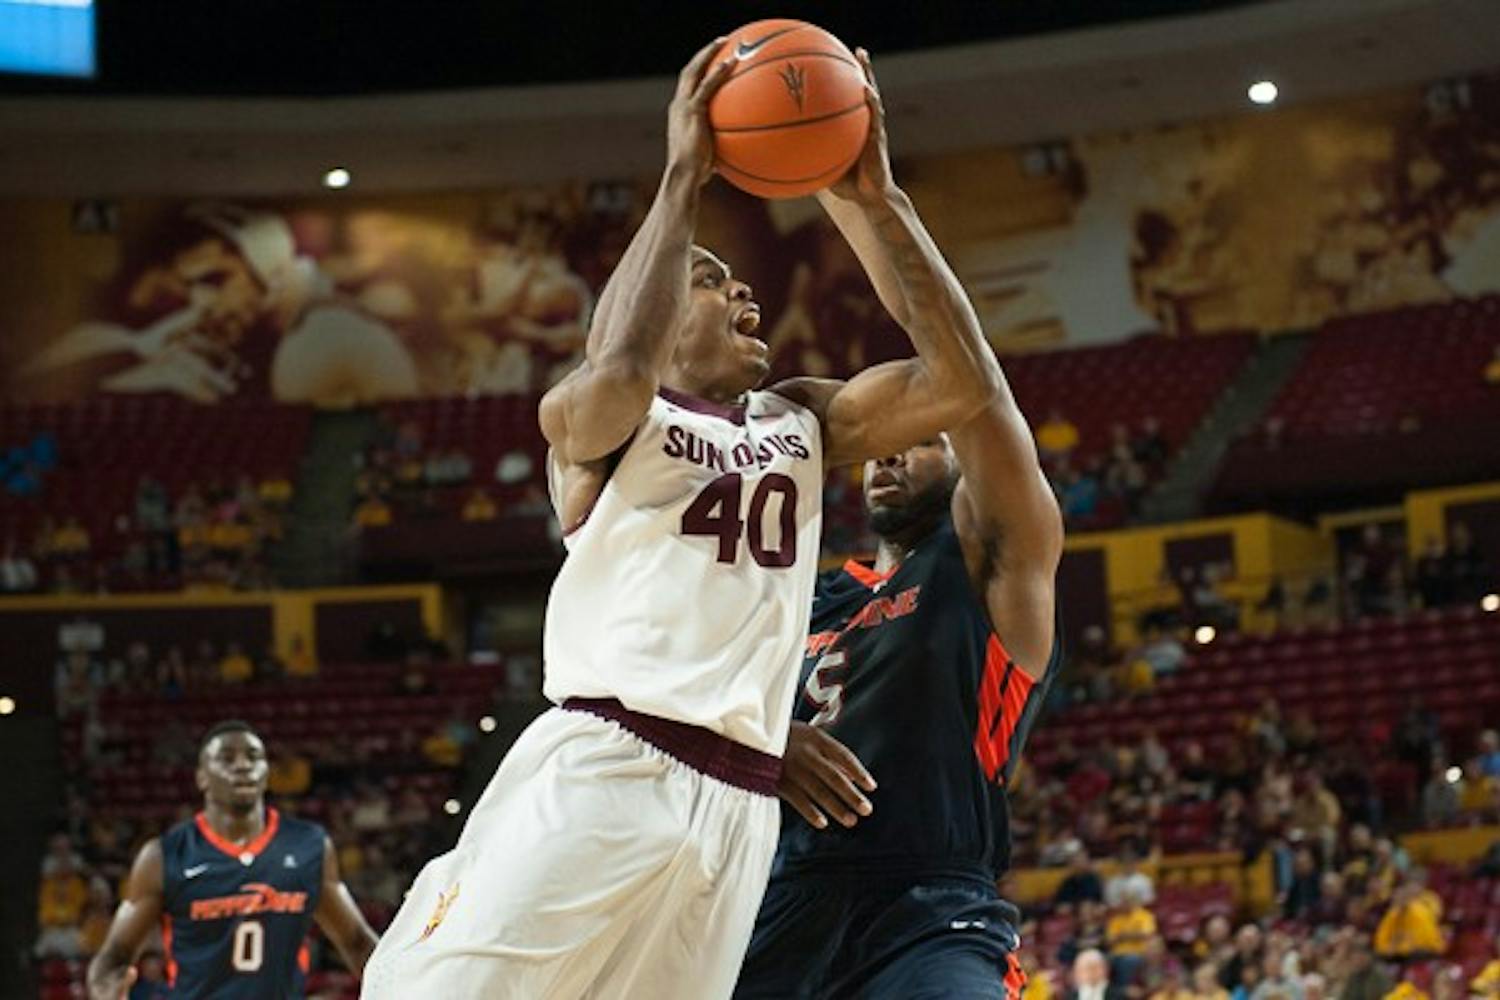 in a game against Pepperdine, Saturday, Dec. 13, 2014 at Wells Fargo Arena in Tempe. After trailing the entire first half, the Sun Devils came from behind and defeated the Waves 81-74. (Photo by Ben Moffat)